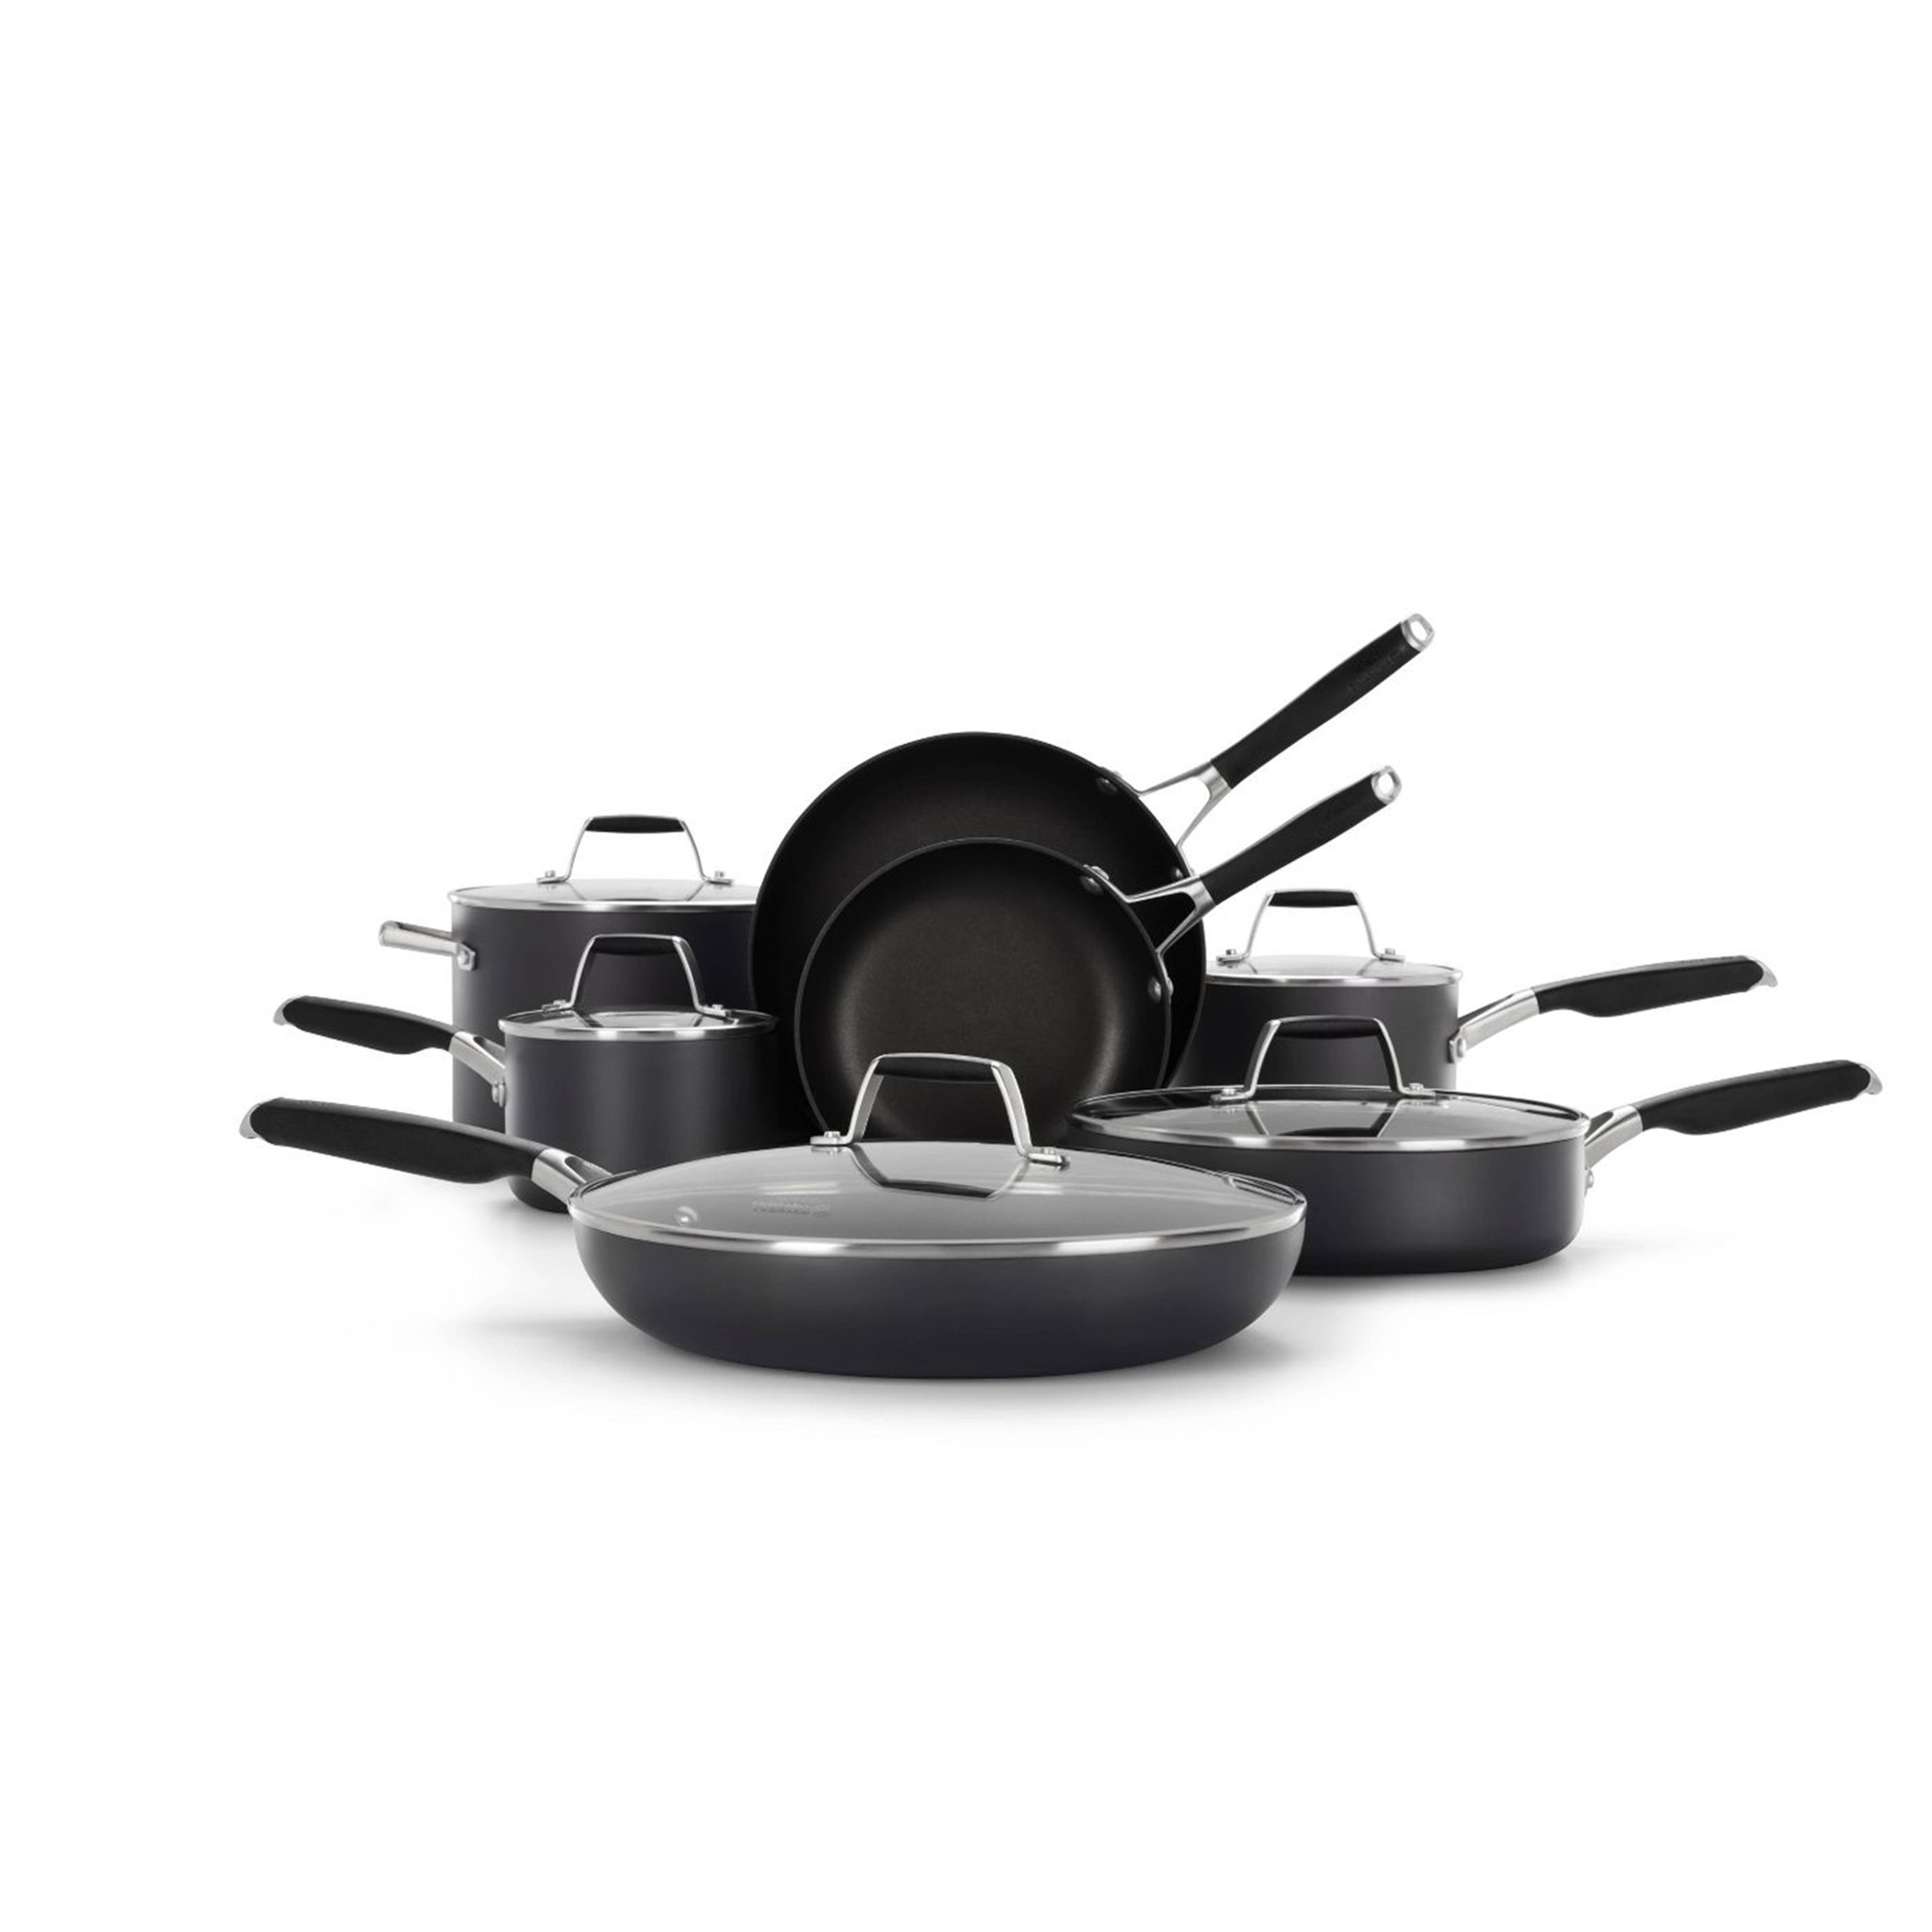 https://ak1.ostkcdn.com/images/products/is/images/direct/6eeb51bedb591382dfefc91e3b2b6cb00f66c9bc/Select-by-Calphalon-Hard-Anodized-Nonstick-Cookware%2C-12-Piece-Pots-and-Pans-Set.jpg